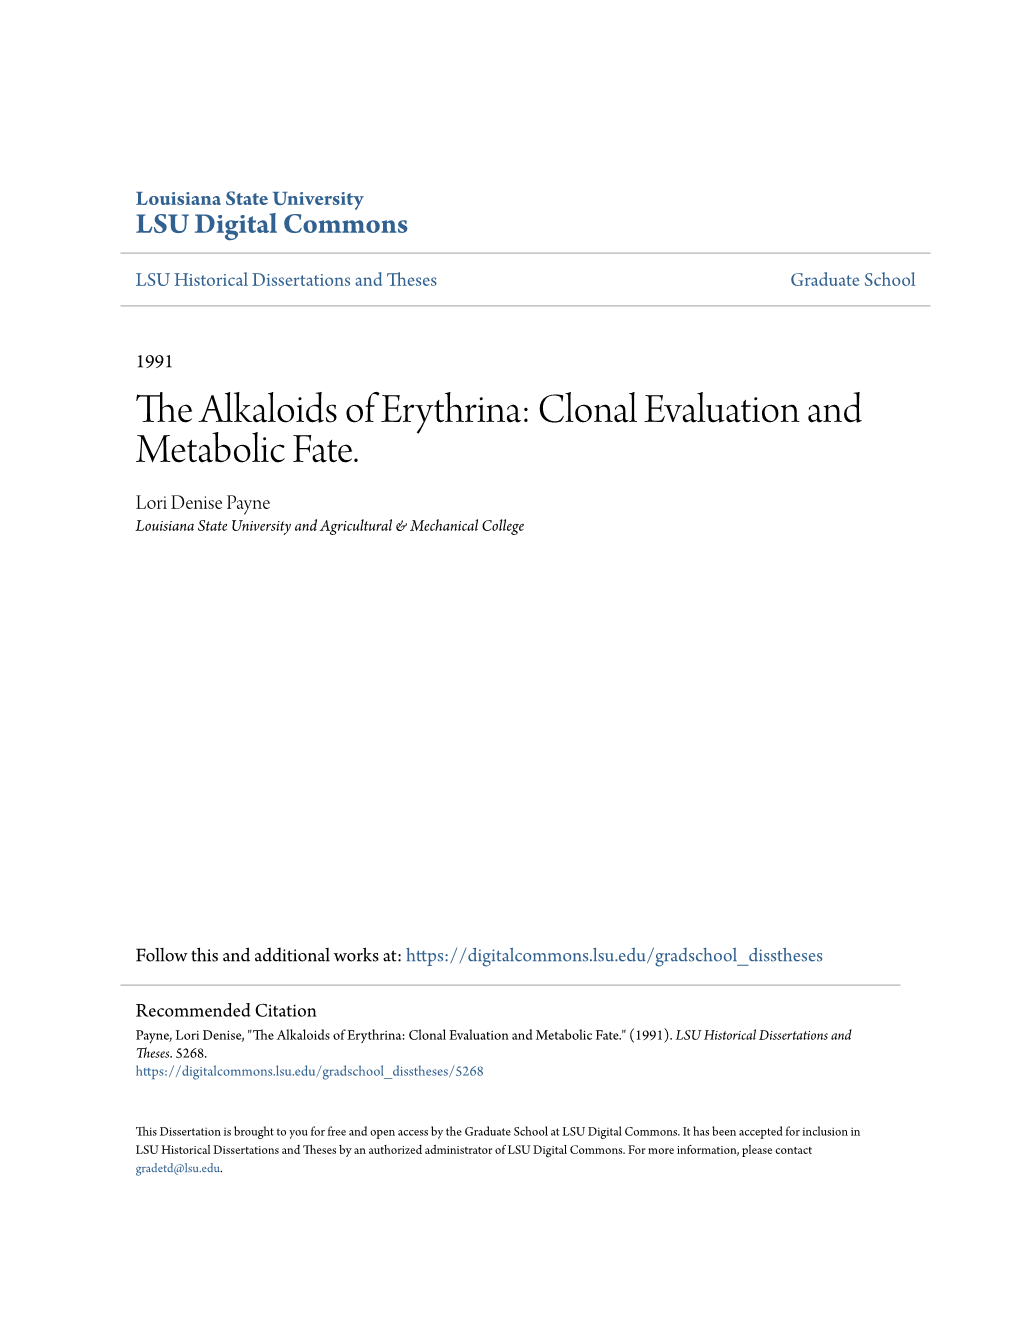 The Alkaloids of Erythrina: Clonal Evaluation and Metabolic Fate